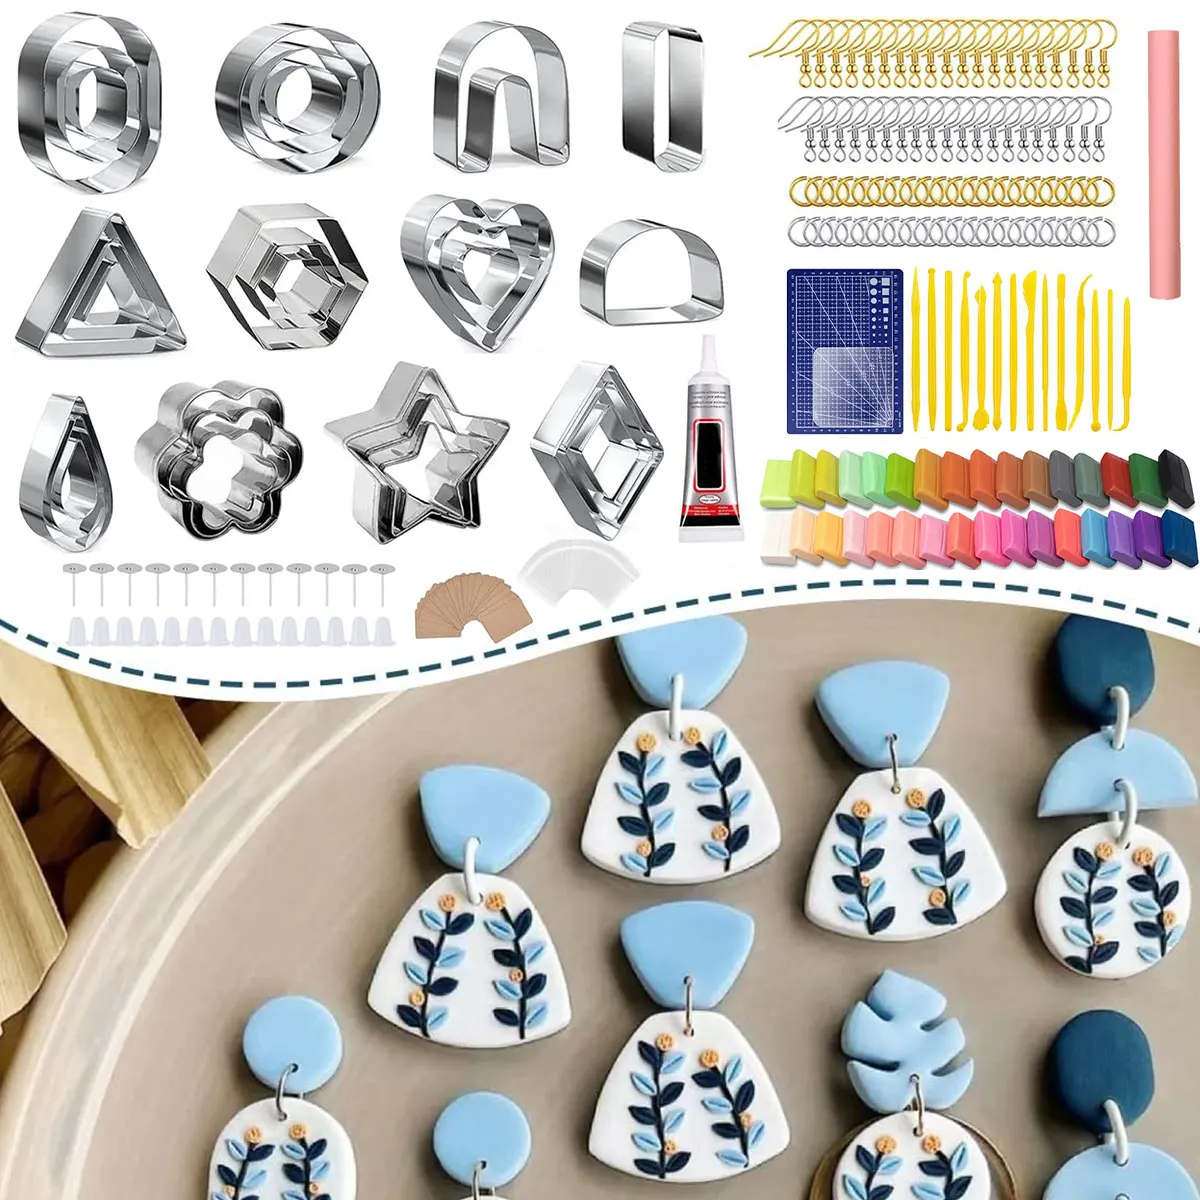 Polymer Clay Earring Making Kit Include 30Pcs Polymer Clay Earring Cutters  Molds, 32Colors Clay, Tools, Rollers - AliExpress